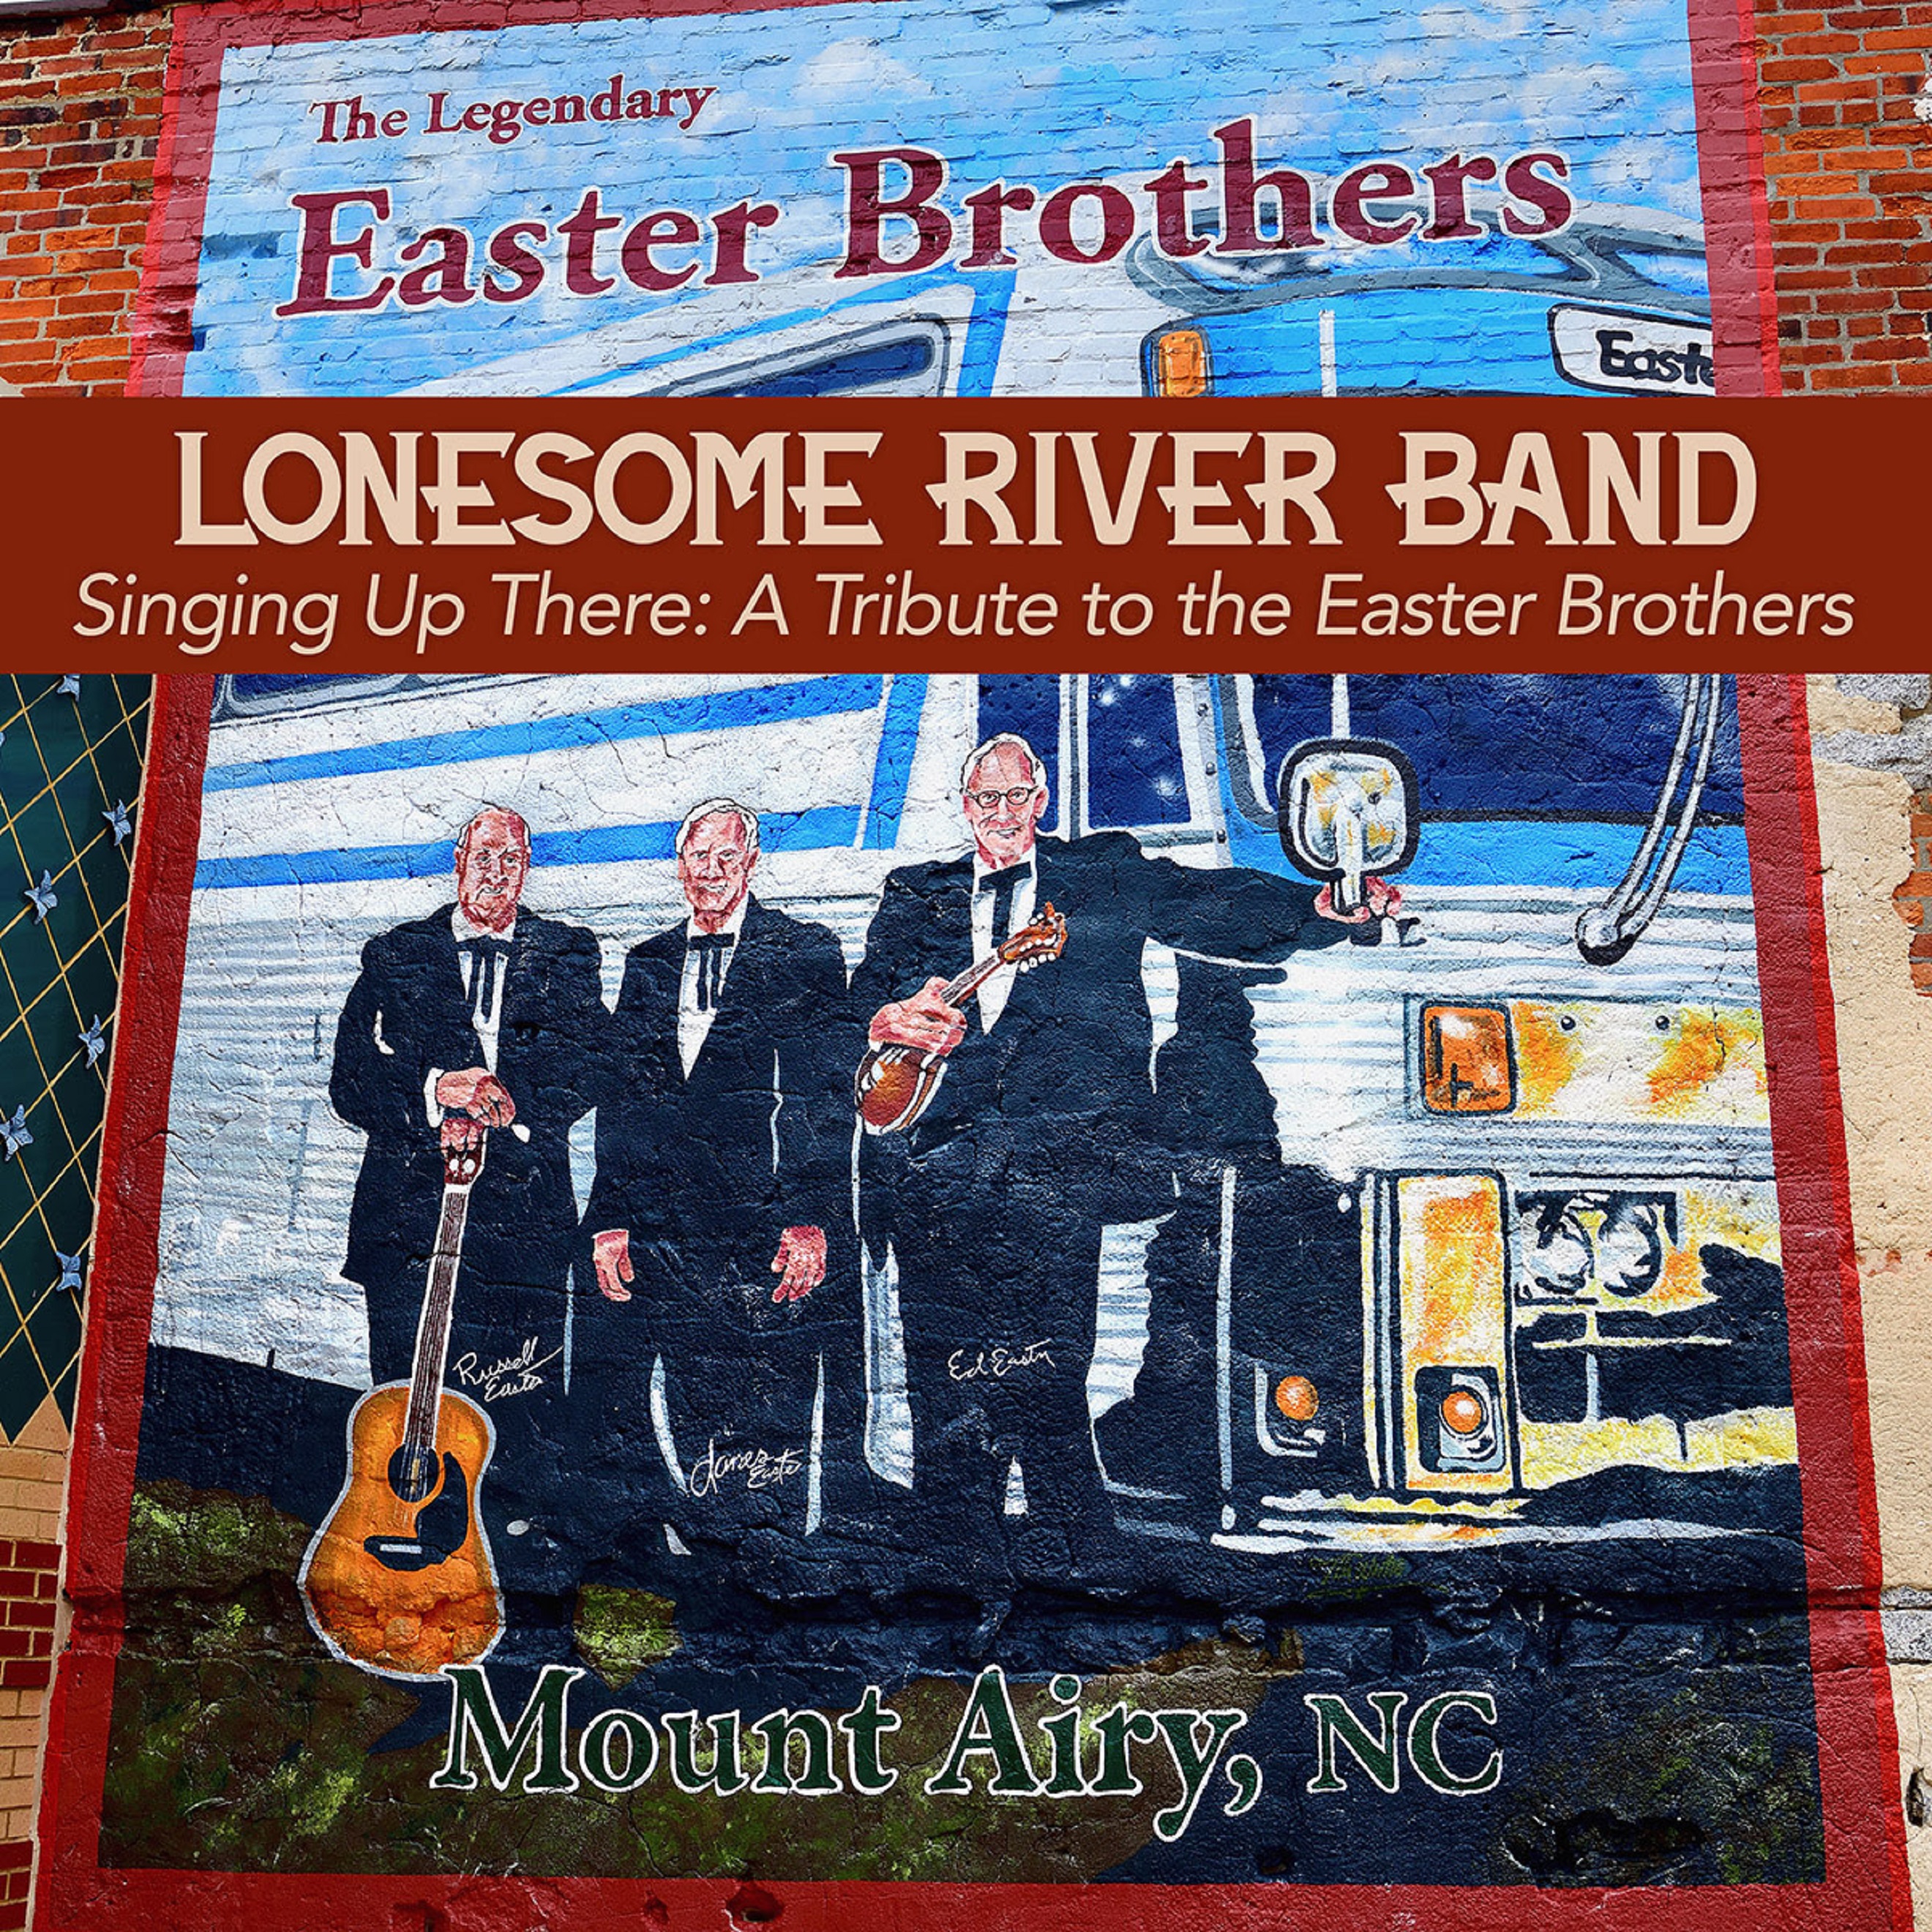 Lonesome River Band's tribute to the Easter Brothers out now